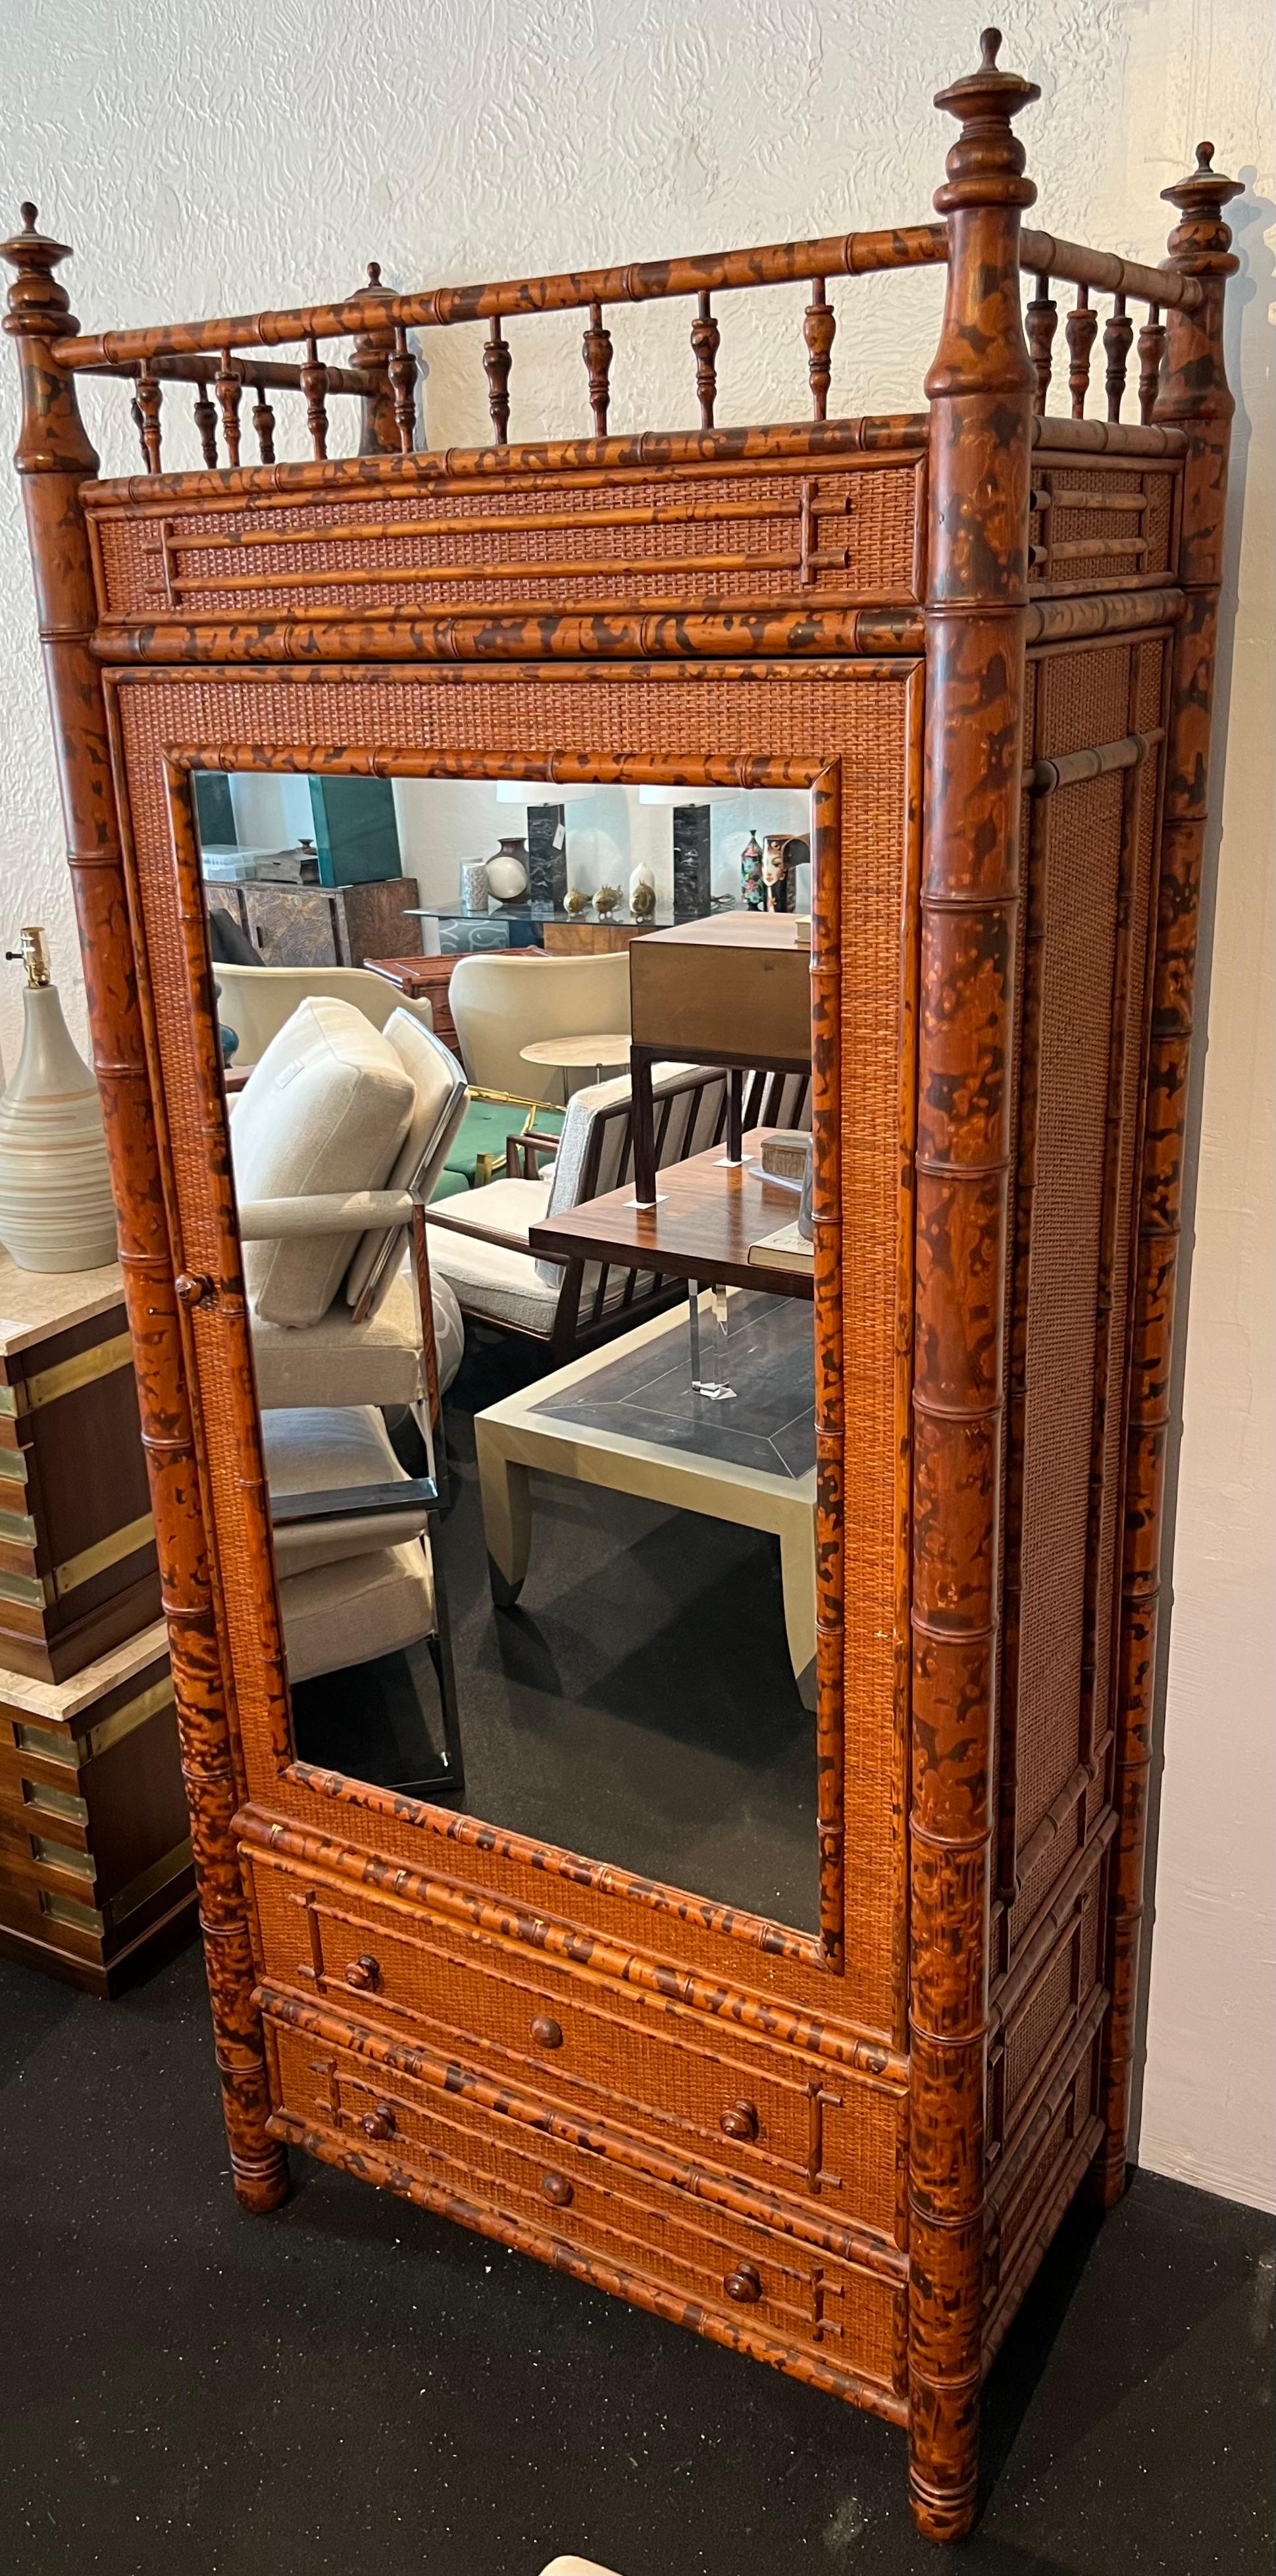 British colonial style burnt bamboo and cane armoire. Signed Bloomingdales. Wear to finish of cane and bamboo (please refer to photos). Additional photos available upon request.

Would work well in a variety of interiors such as modern, mid century